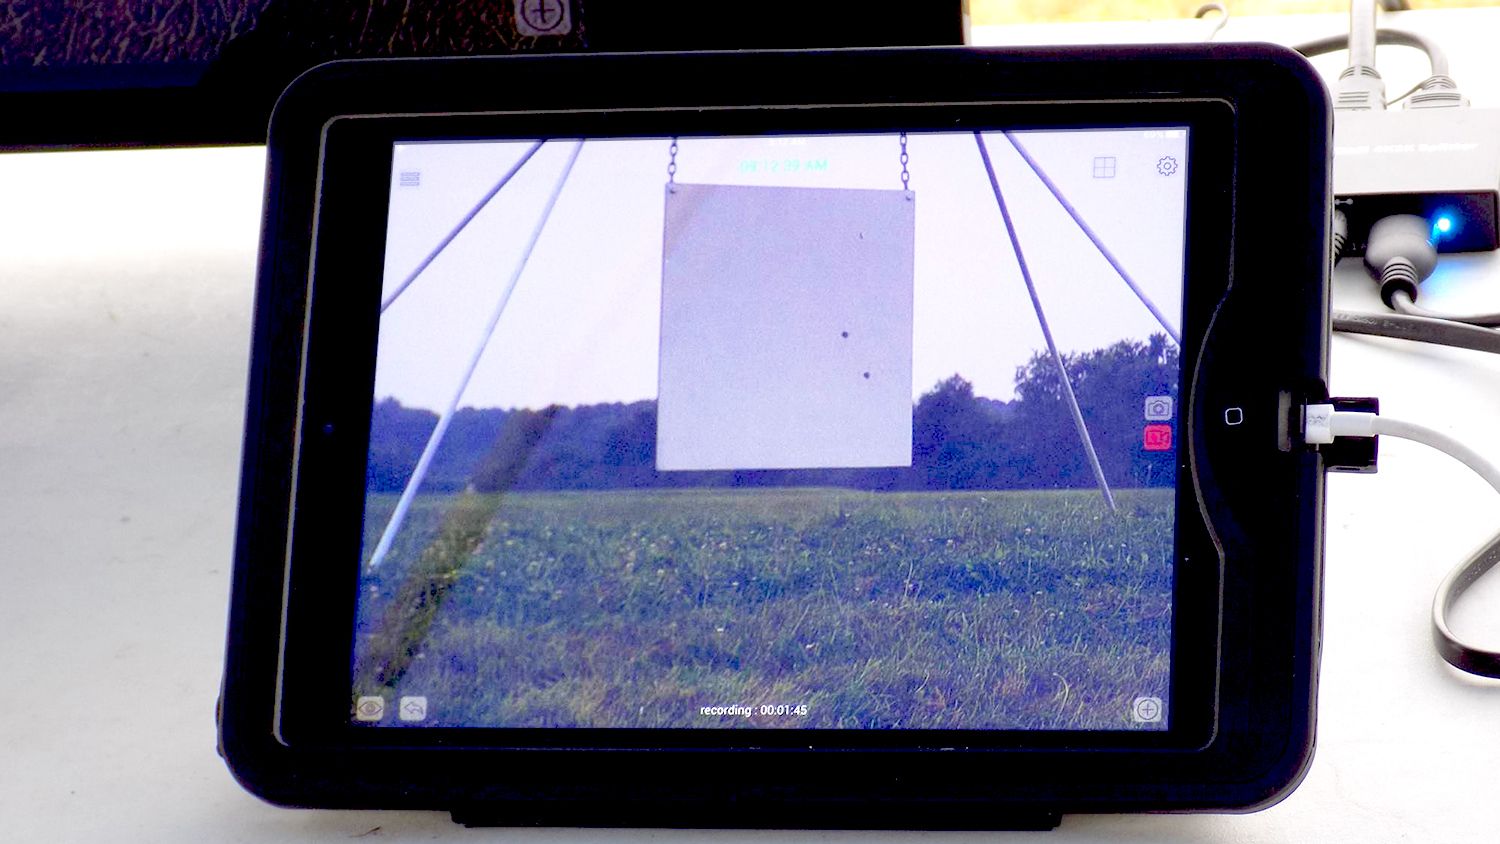 Targetvision feed on a tablet at NRA ELR